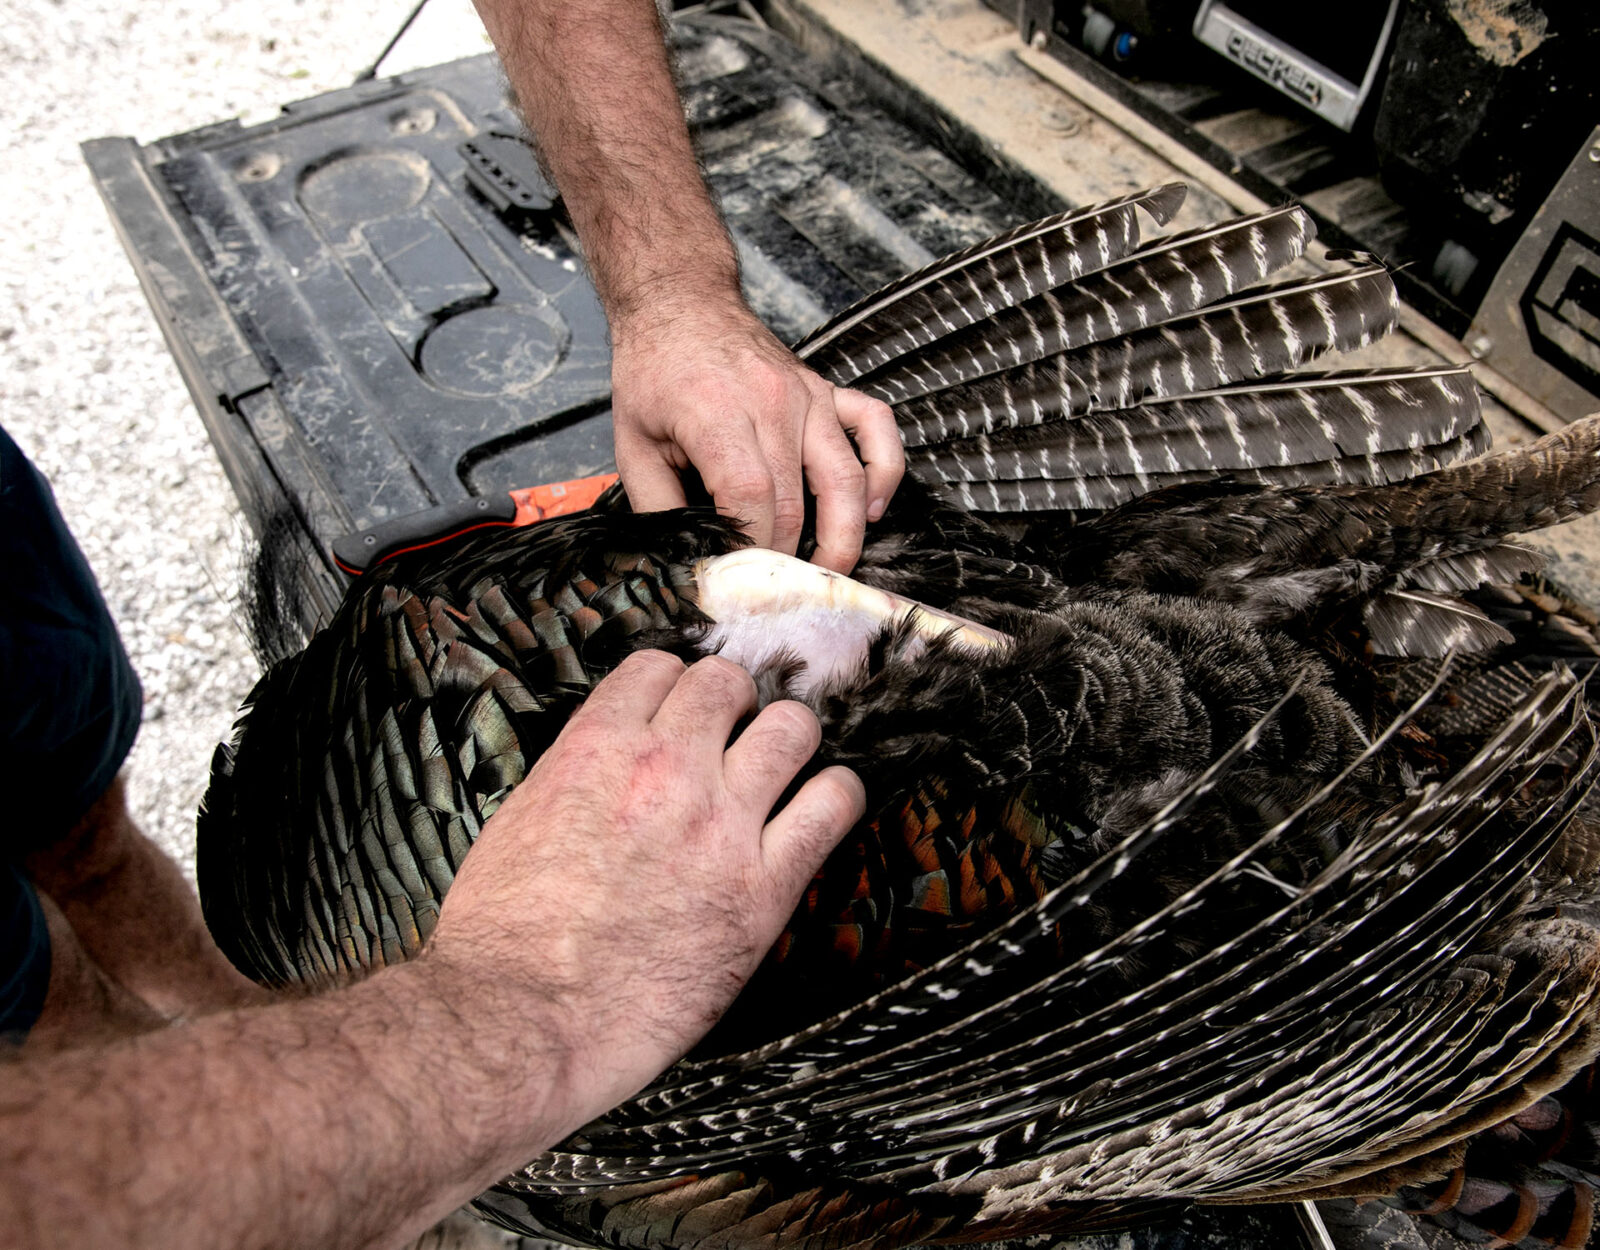 Cleaning a wild turkey guide step 2 - expose the breast 